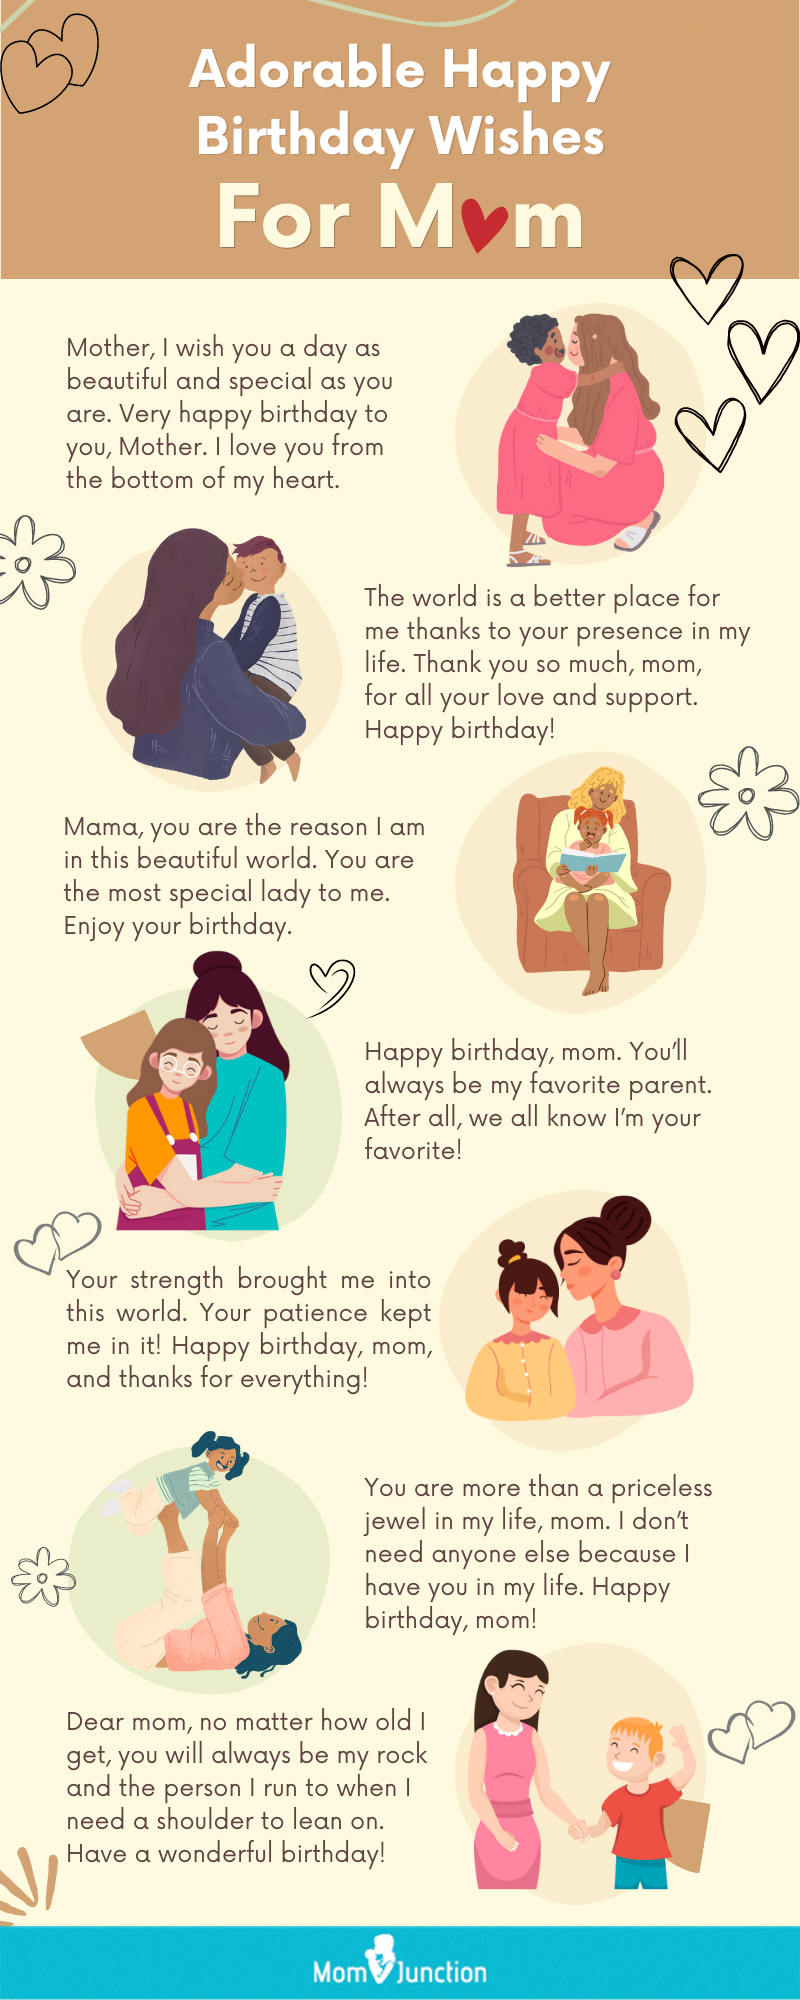 happy birthday wishes for mom [infographic]